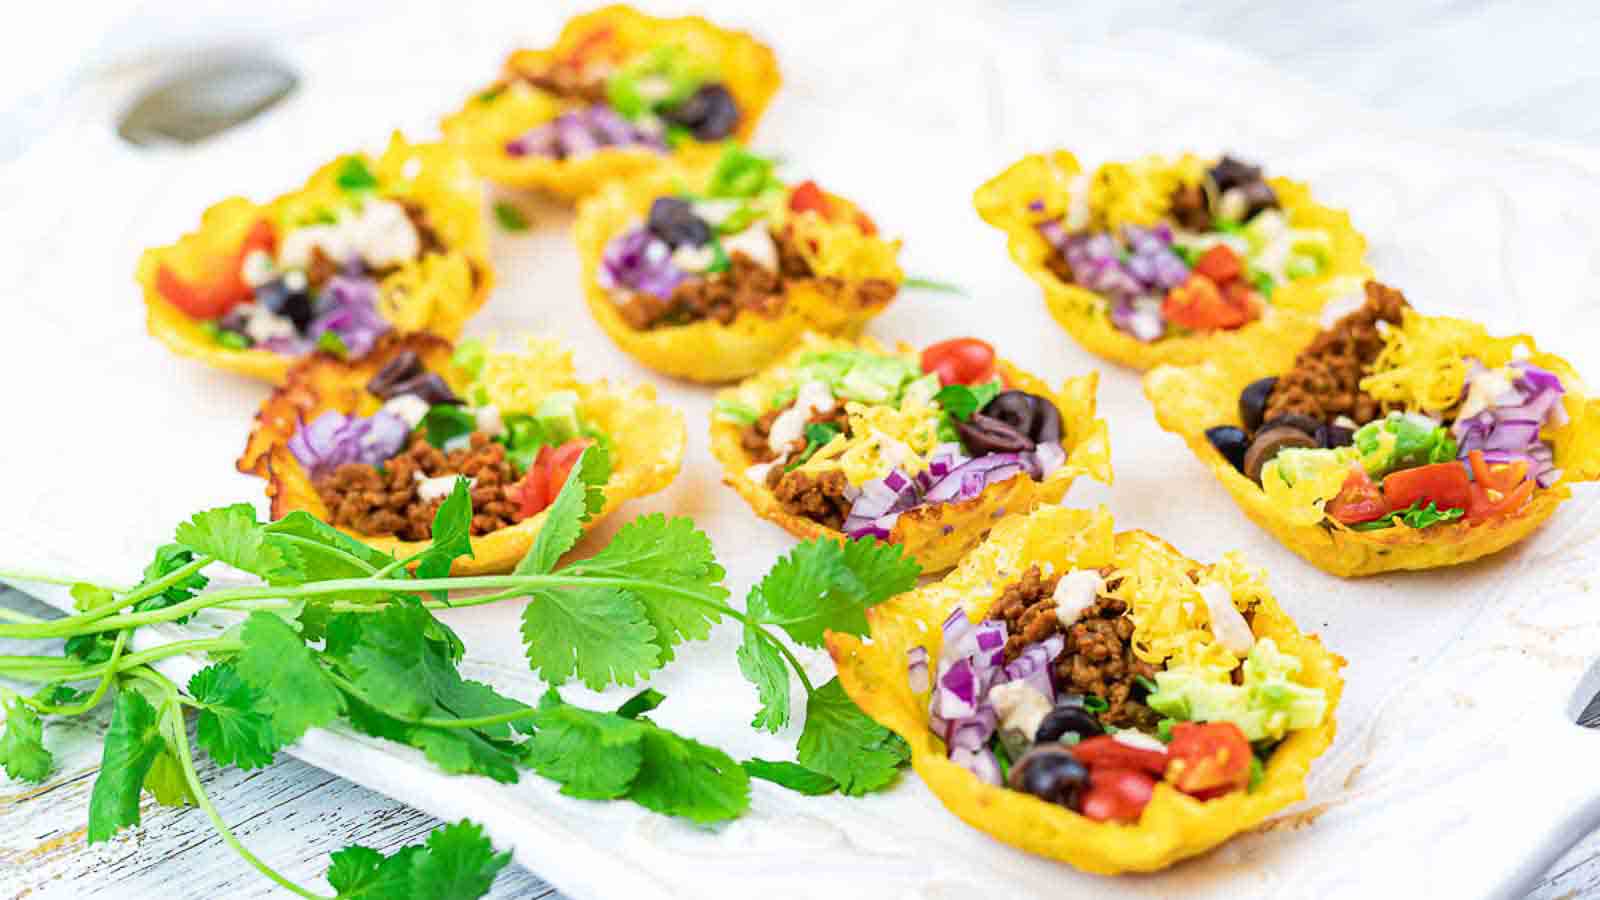 <p>Dive into the Crunchy Taco Cup Delights – a low-carb experience that brings taco joy to your fingertips. These cups are a miniature version of your beloved tacos, offering a satisfying crunch and a burst of Mexican-inspired taste. Whether it’s a party or a casual snack, these cups deliver the taco goodness you love without the carb overload.</p><p><strong>Get the Recipe: </strong><a href="https://www.lowcarb-nocarb.com/low-carb-taco-cups/?utm_source=msn&utm_medium=page&utm_campaign=msn">Low Carb Taco Cup Delights</a></p>